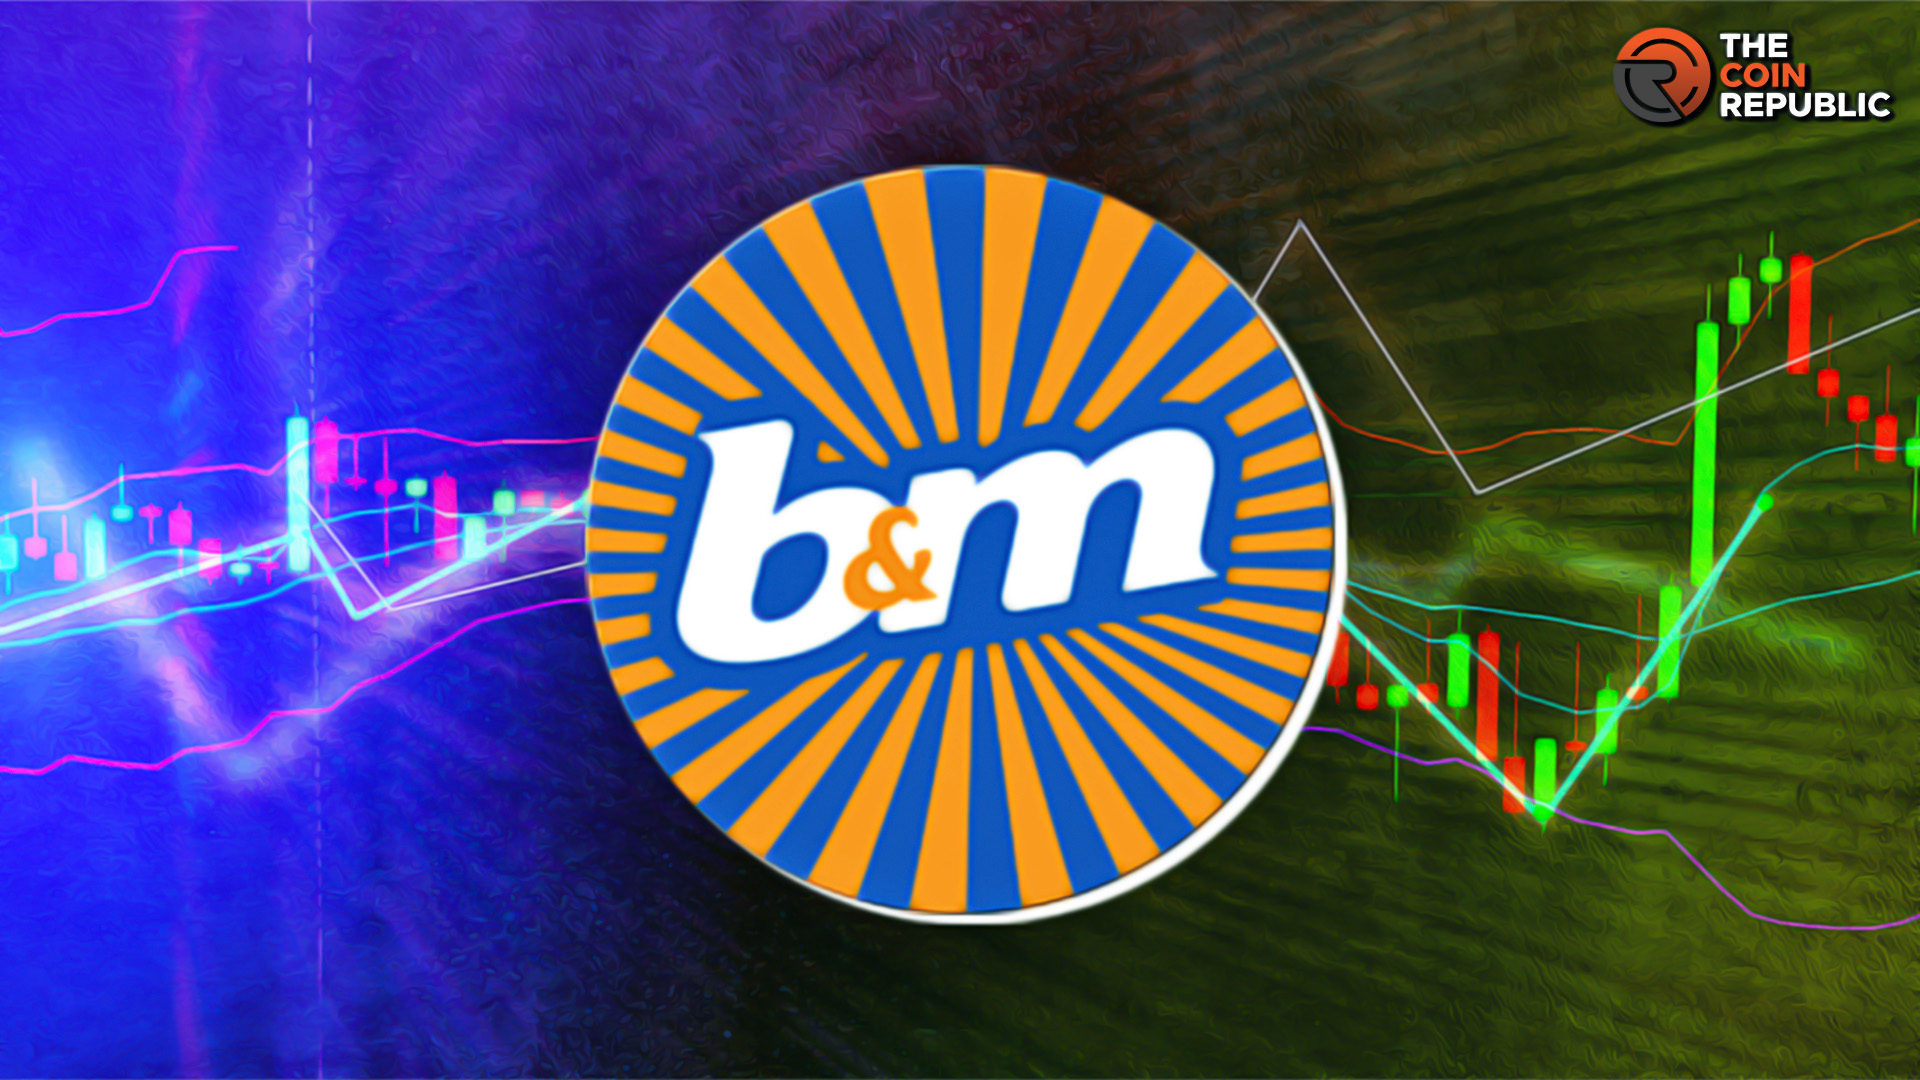 BME Stock Price: Analysts Rated “Buy”, the Stock Went Bullish 